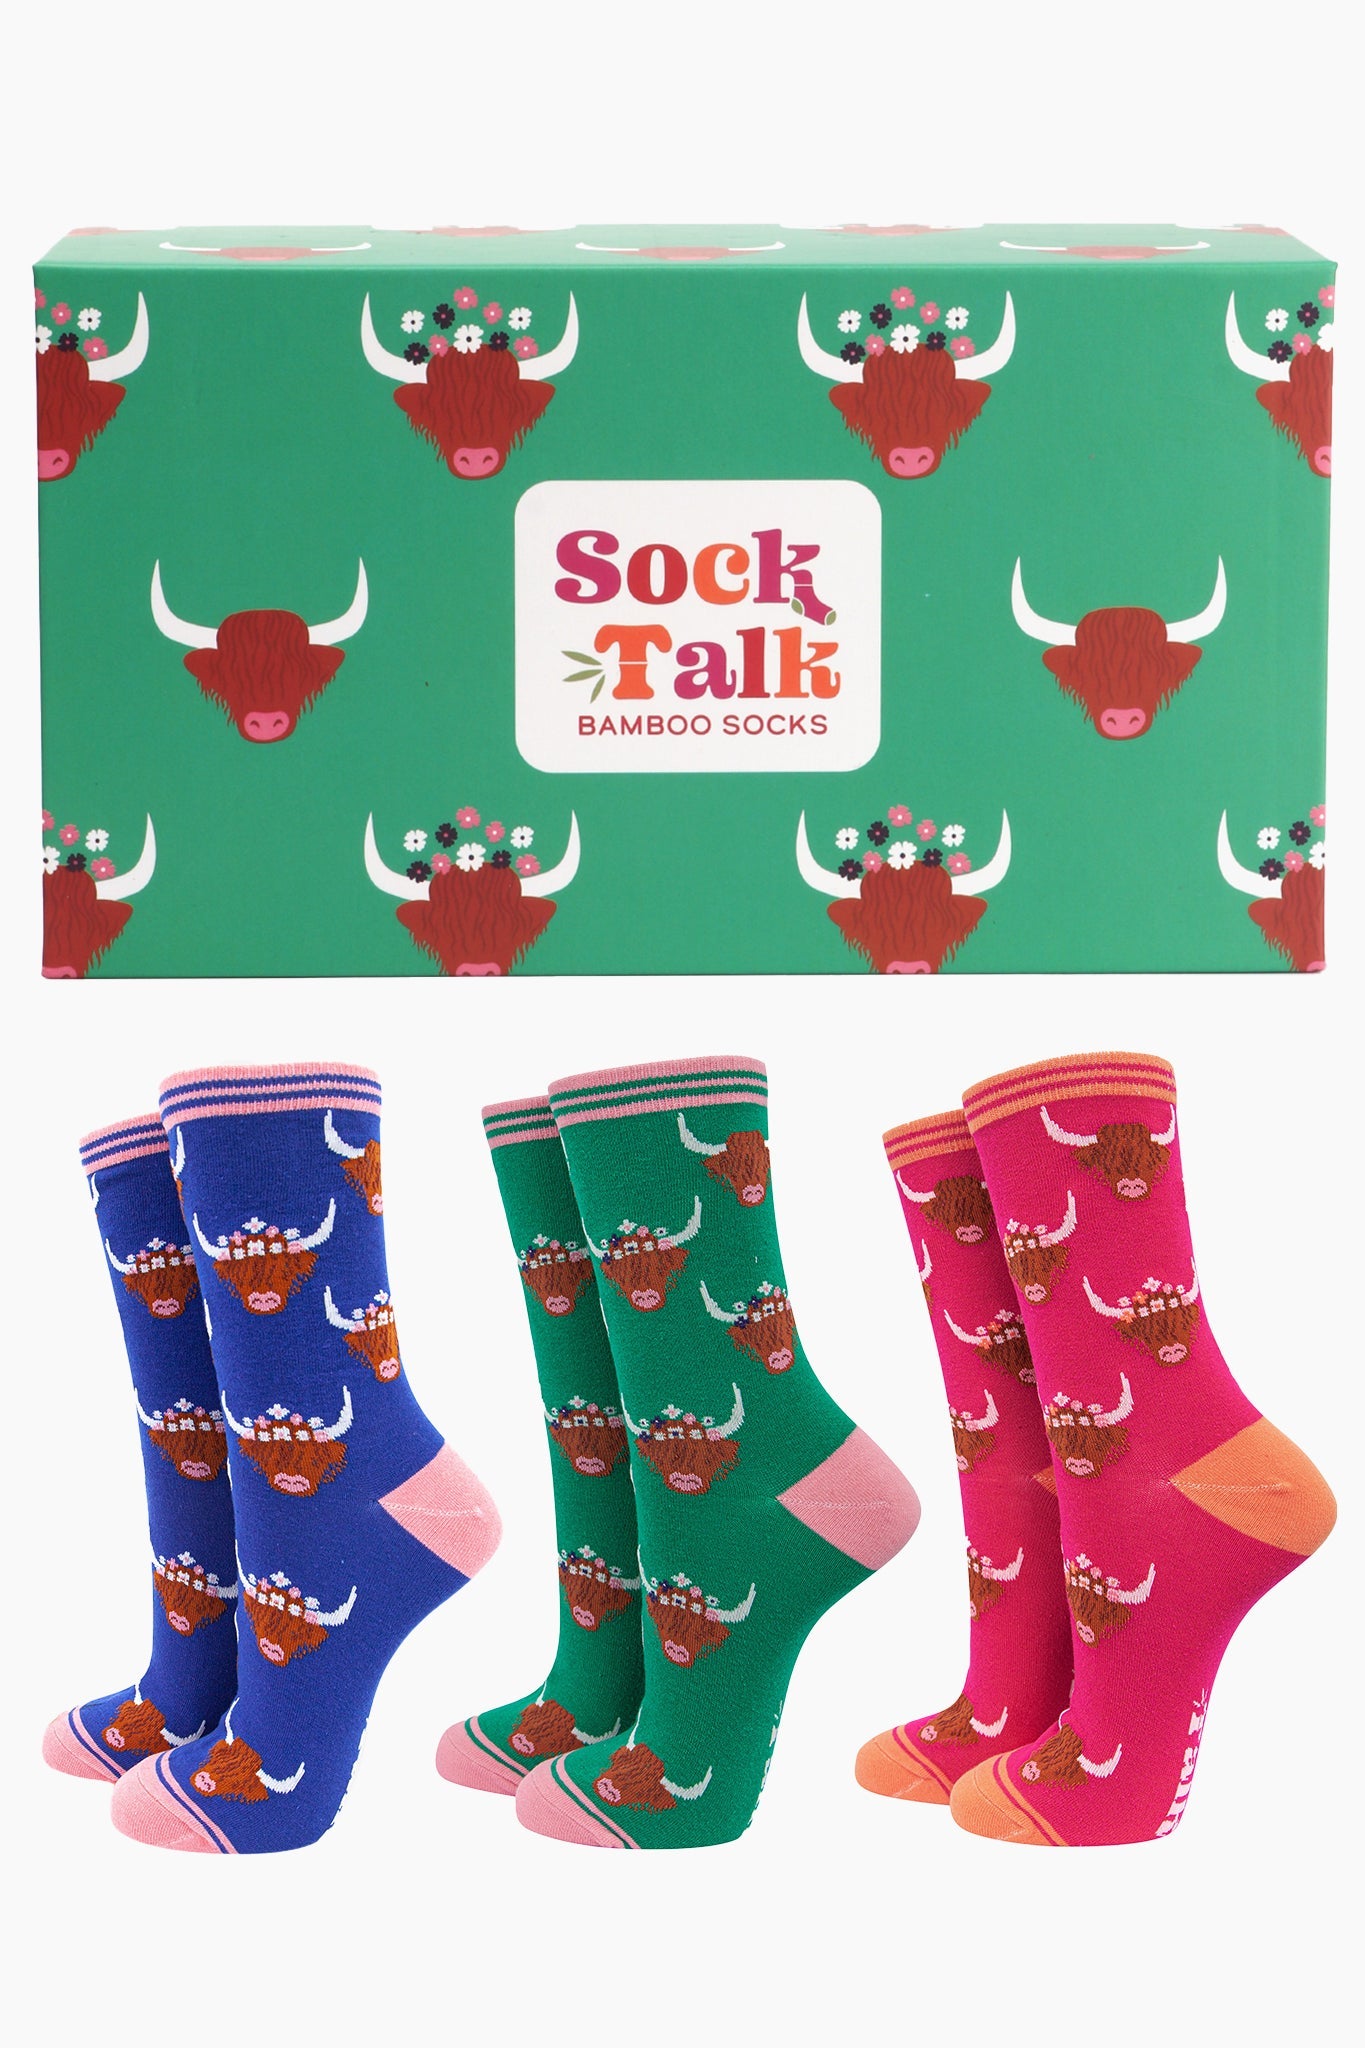 an artistically designed green gift box with an all over pattern of highland cows wearing floral crowns, there are three colourful pairs of highland cow pattern socks in this gift set, one pink, one green and one blue pair of bamboo ankle socks